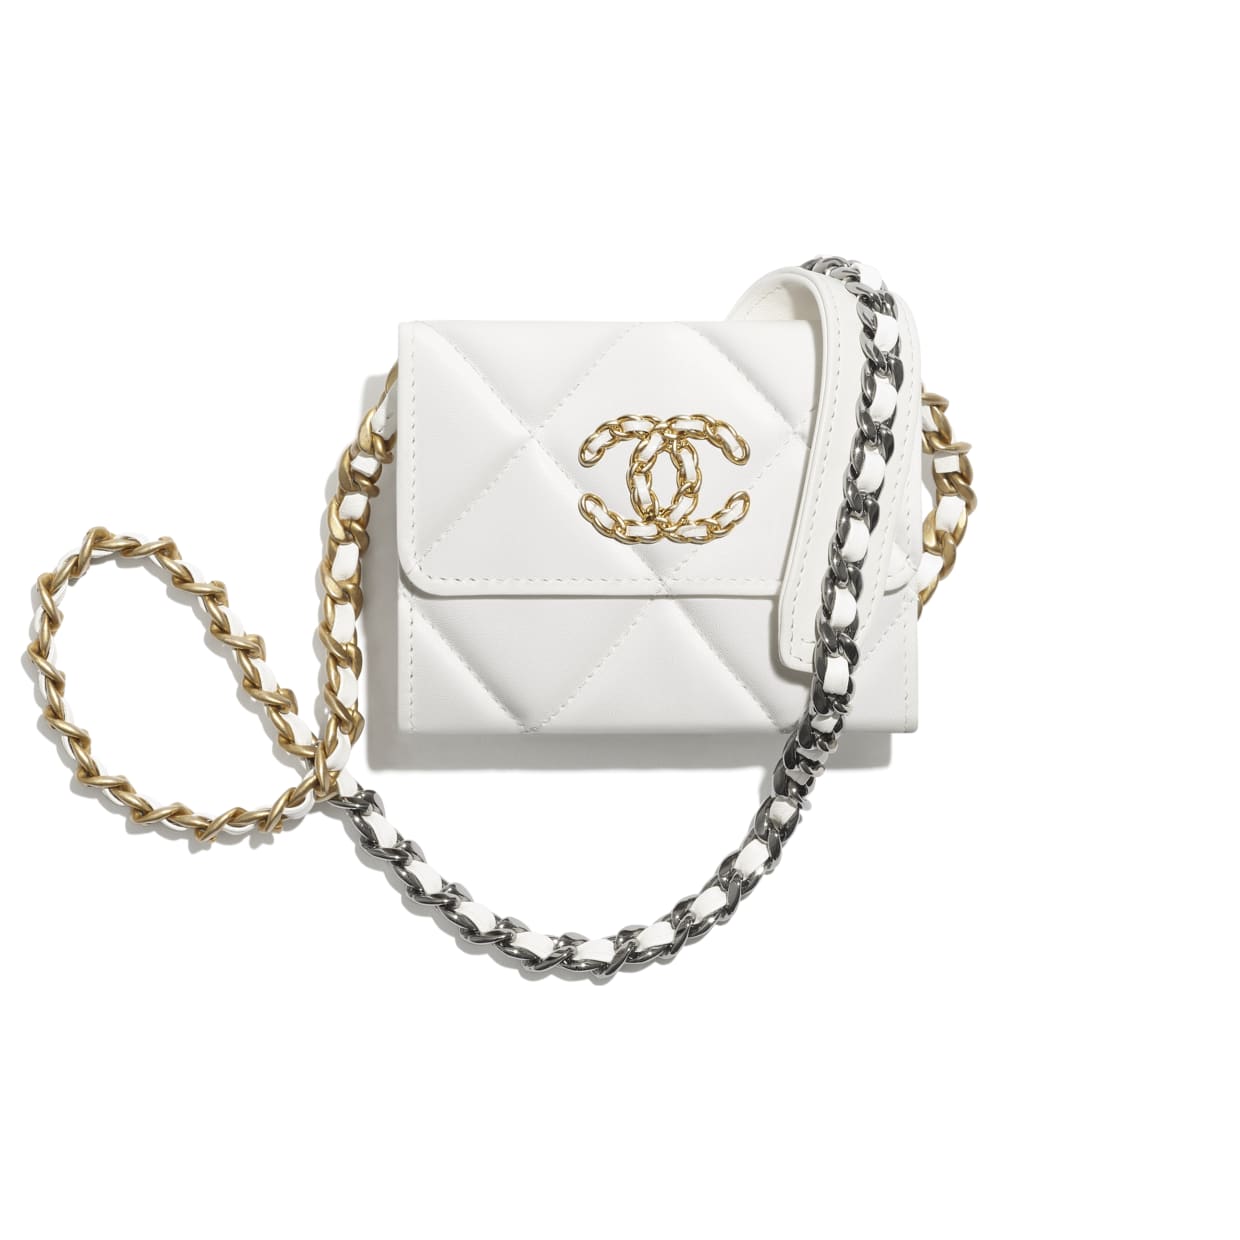 chanel key and card holder